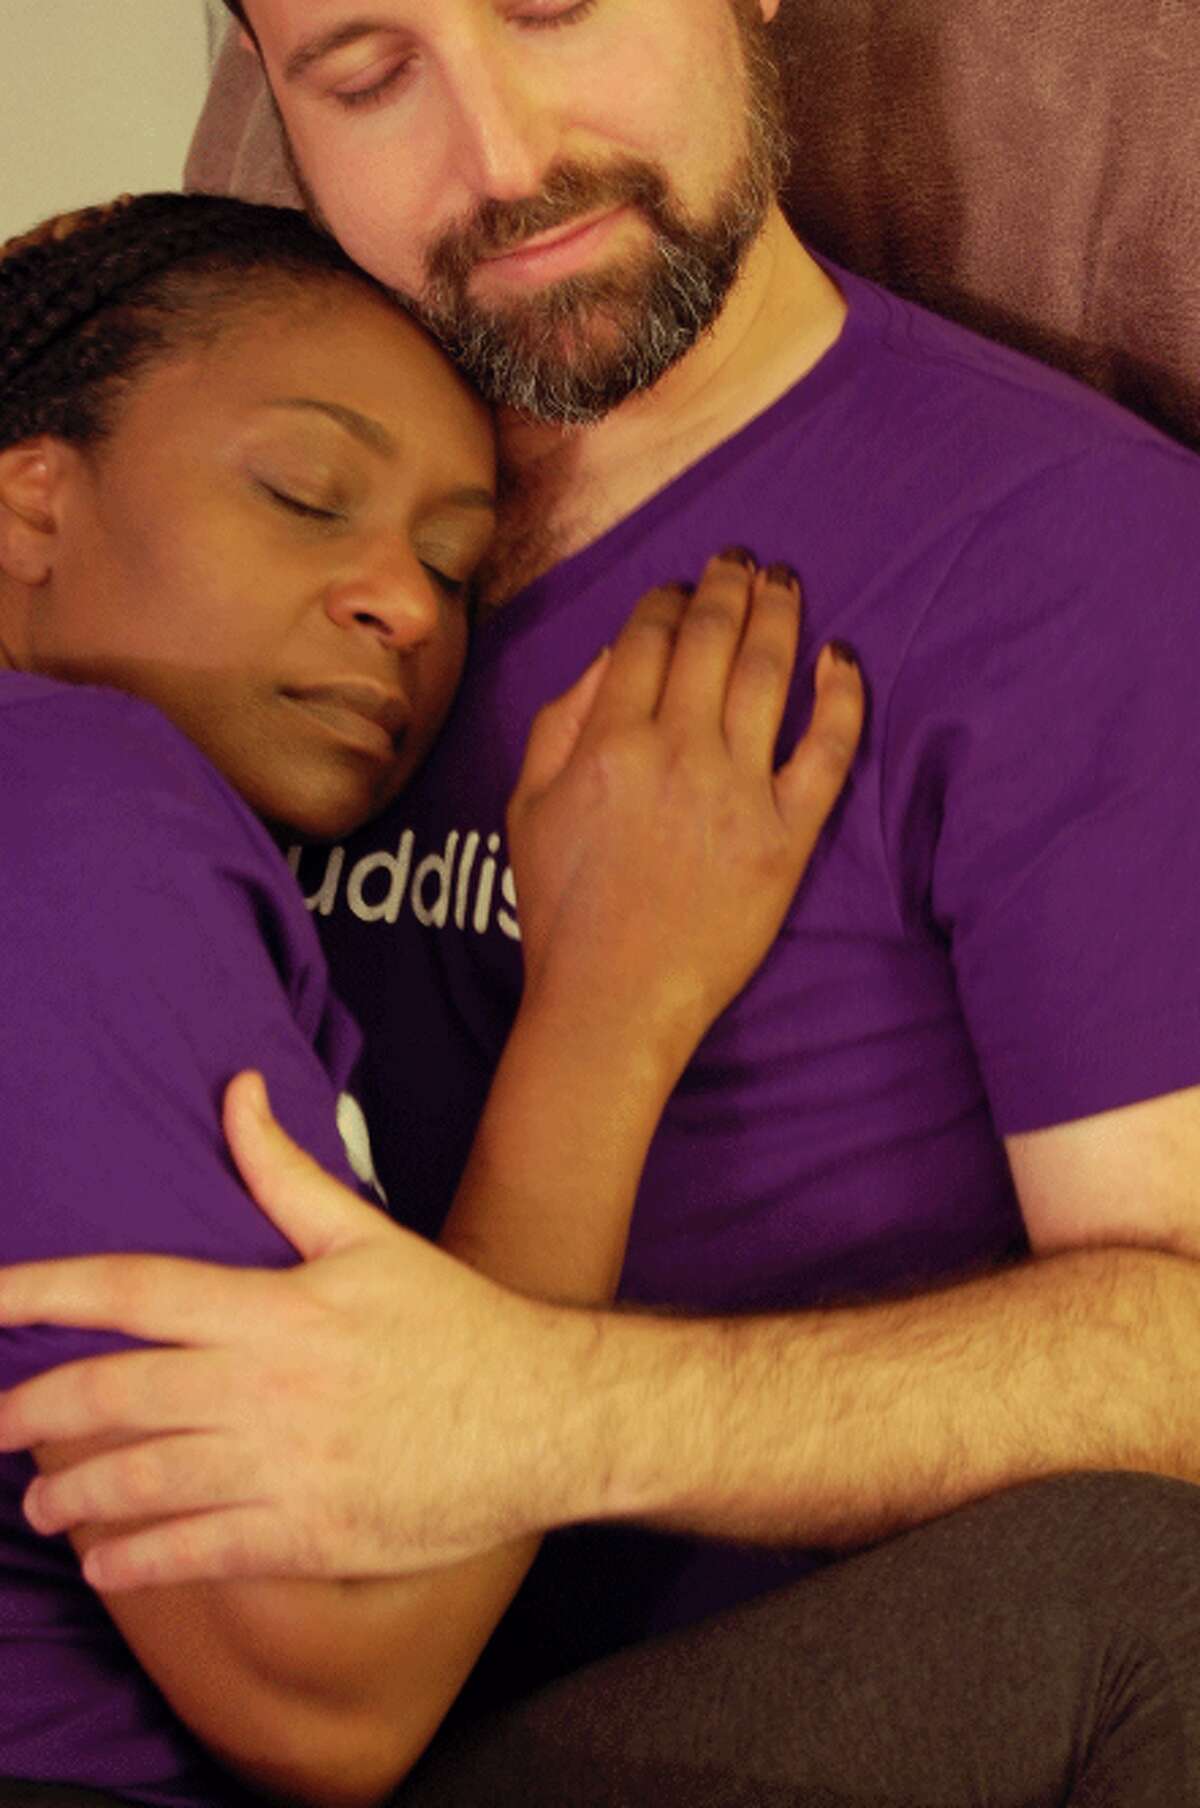 Yoni Alkan, a certified Cuddlist and a Cuddle Party facilitator, cuddles with a client.